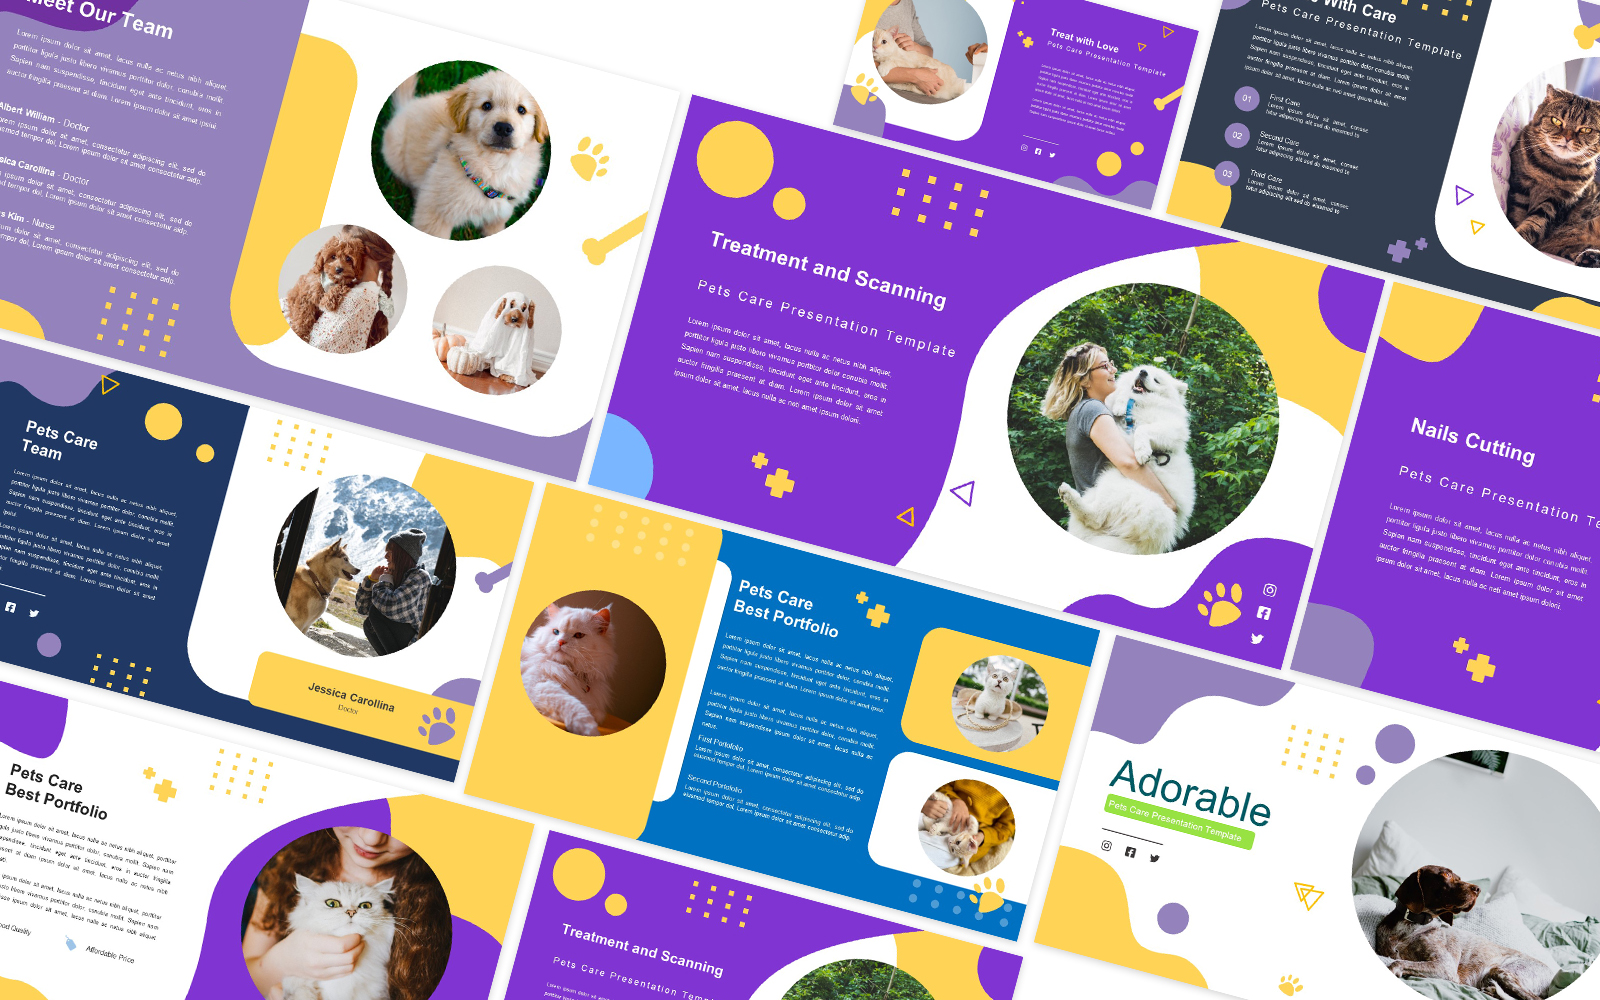 Adorable Pets Care Powerpoint Template